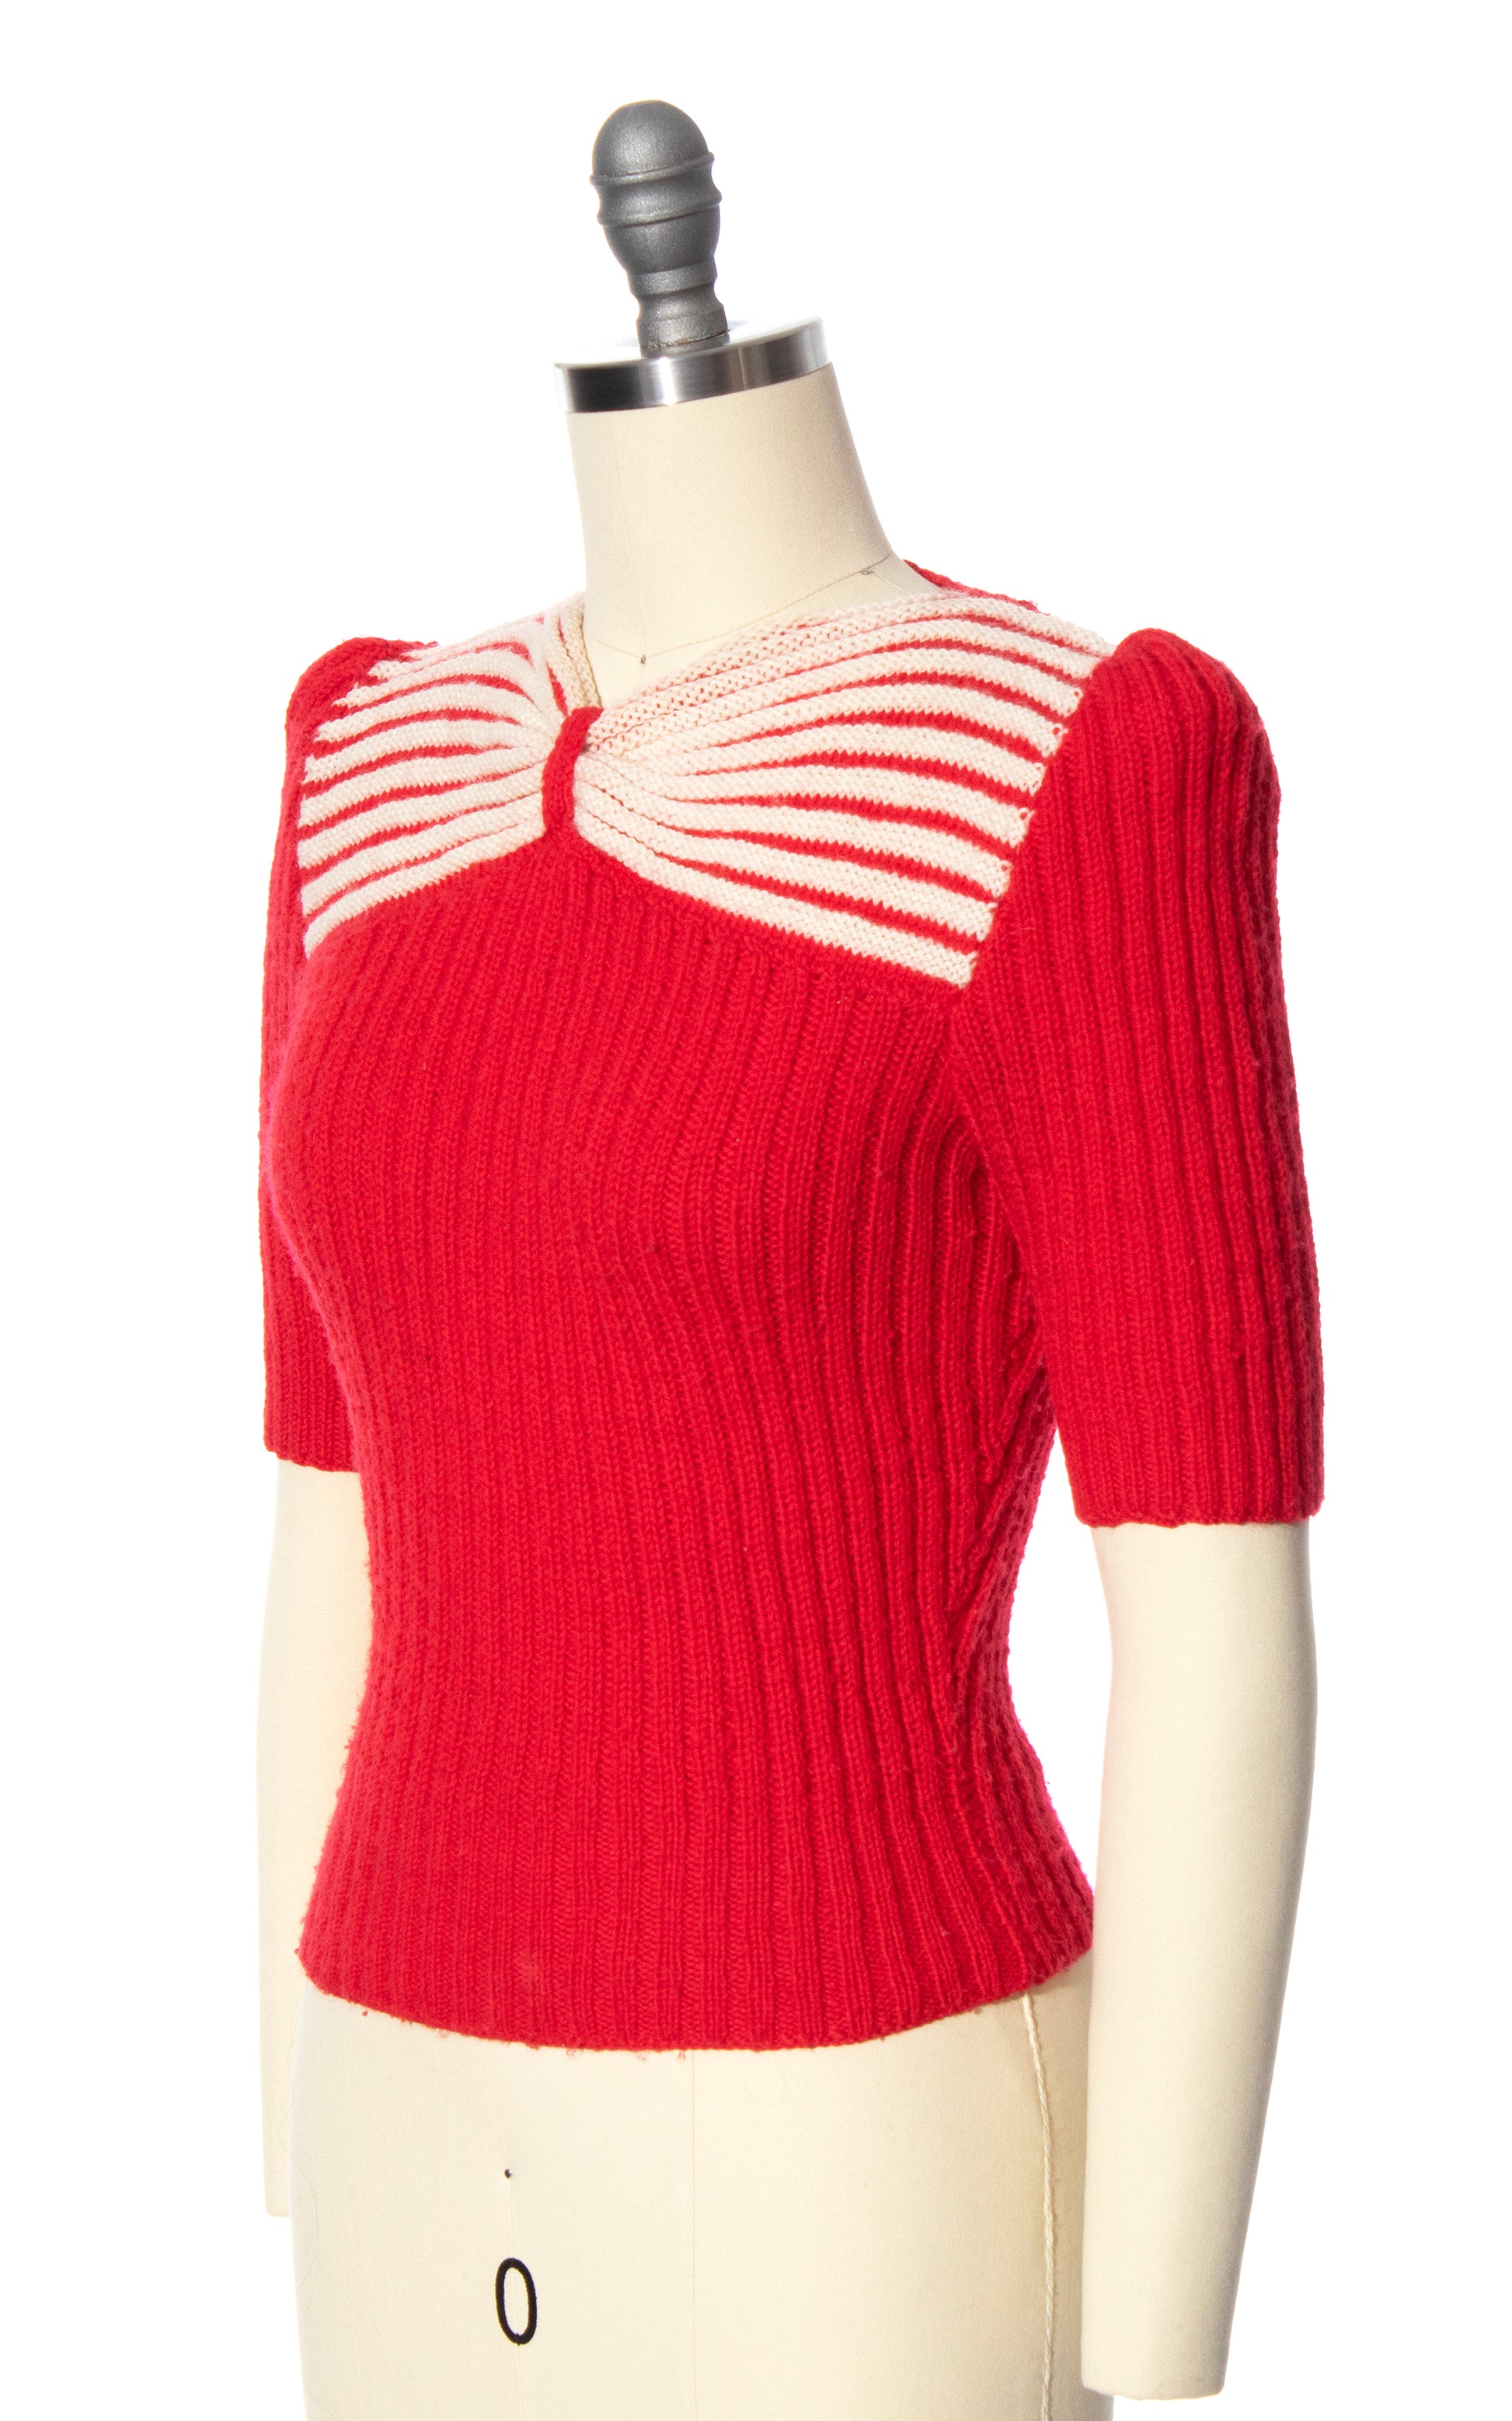 Vintage Style 1940s 40s Repro Reproduction Knit Sweater Top Bow Red Striped BirthdayLifeVintage